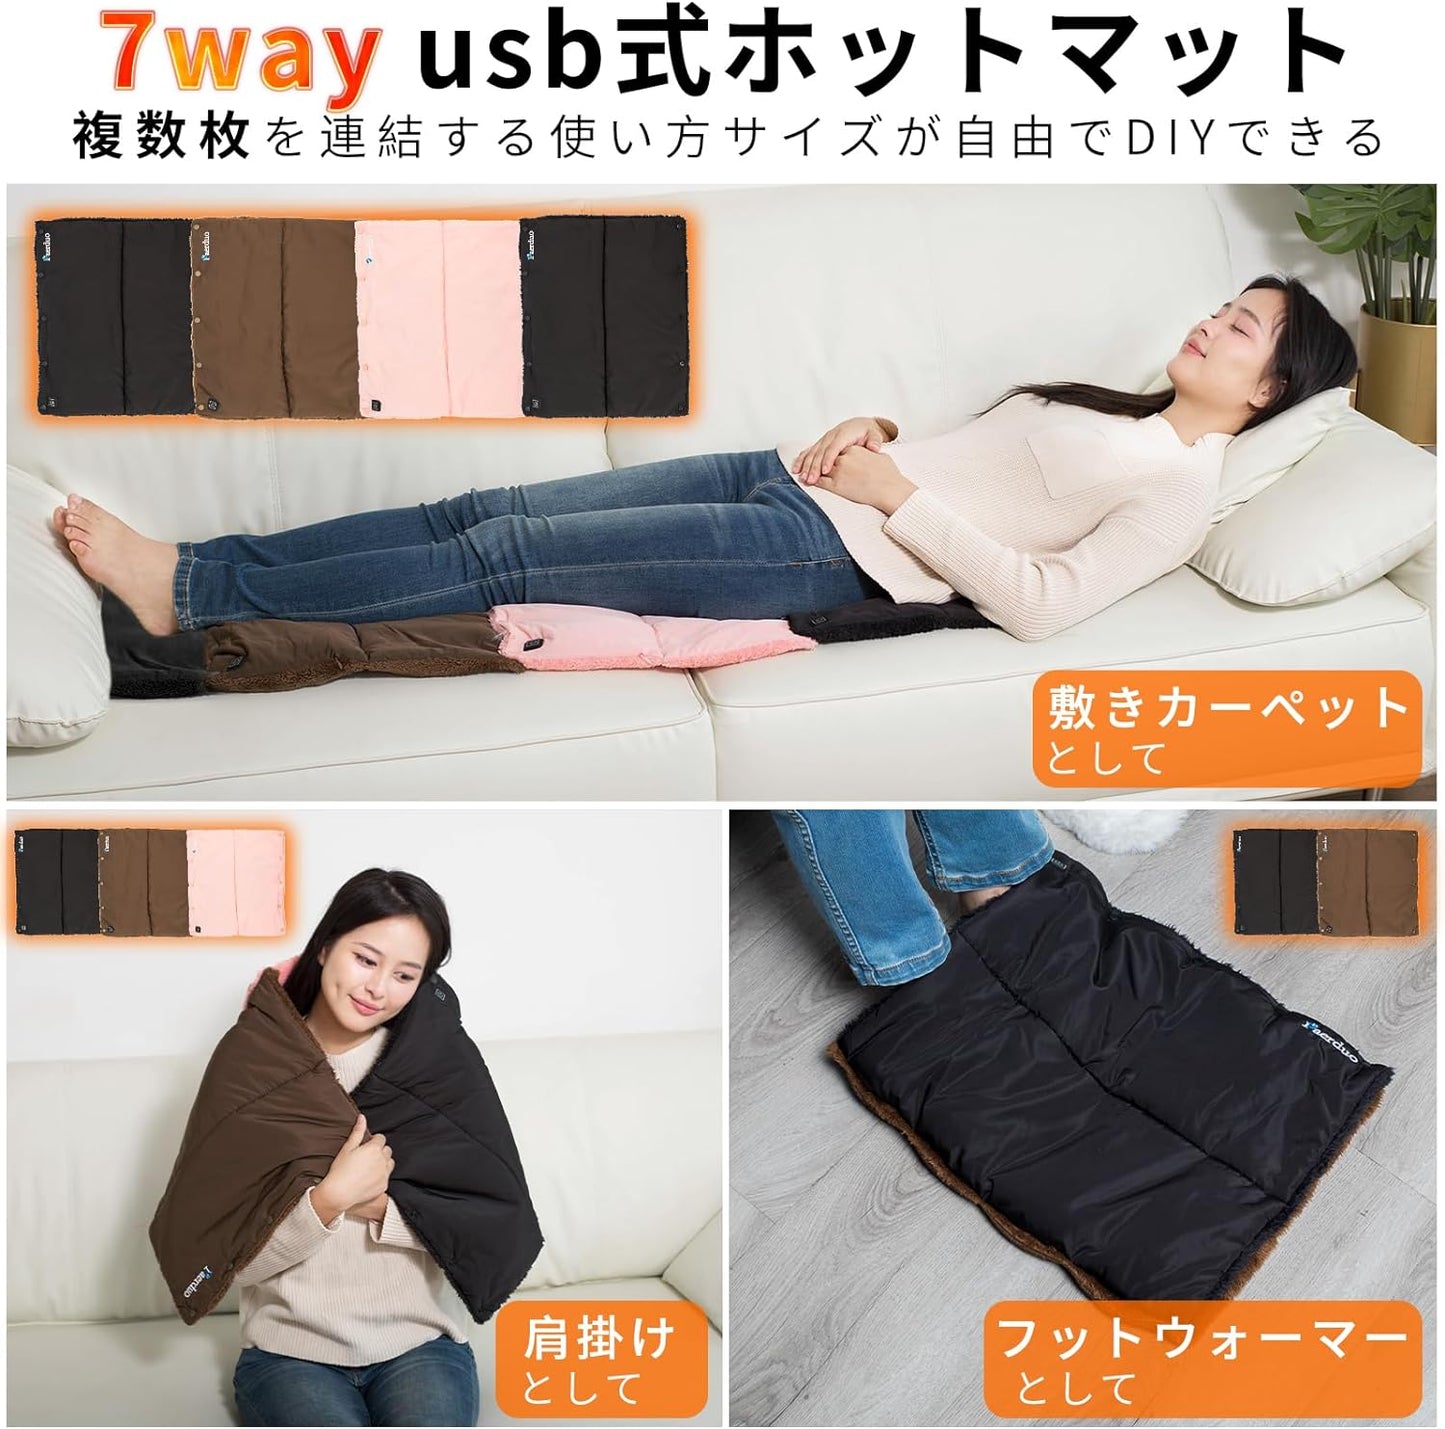 Paerduo Newest 7-Way Hot Mat, USB 10 Seconds Warm, Hot Carpet, Mini, 17.7 x 15.7 inches (45 x 40 cm), 3 Temperature Adjustment, Electric Carpet, Adjustable Size, Adjustable with Snap Connection, Electric Mat, Thick, Lightweight, Japanese Heater, Washable,